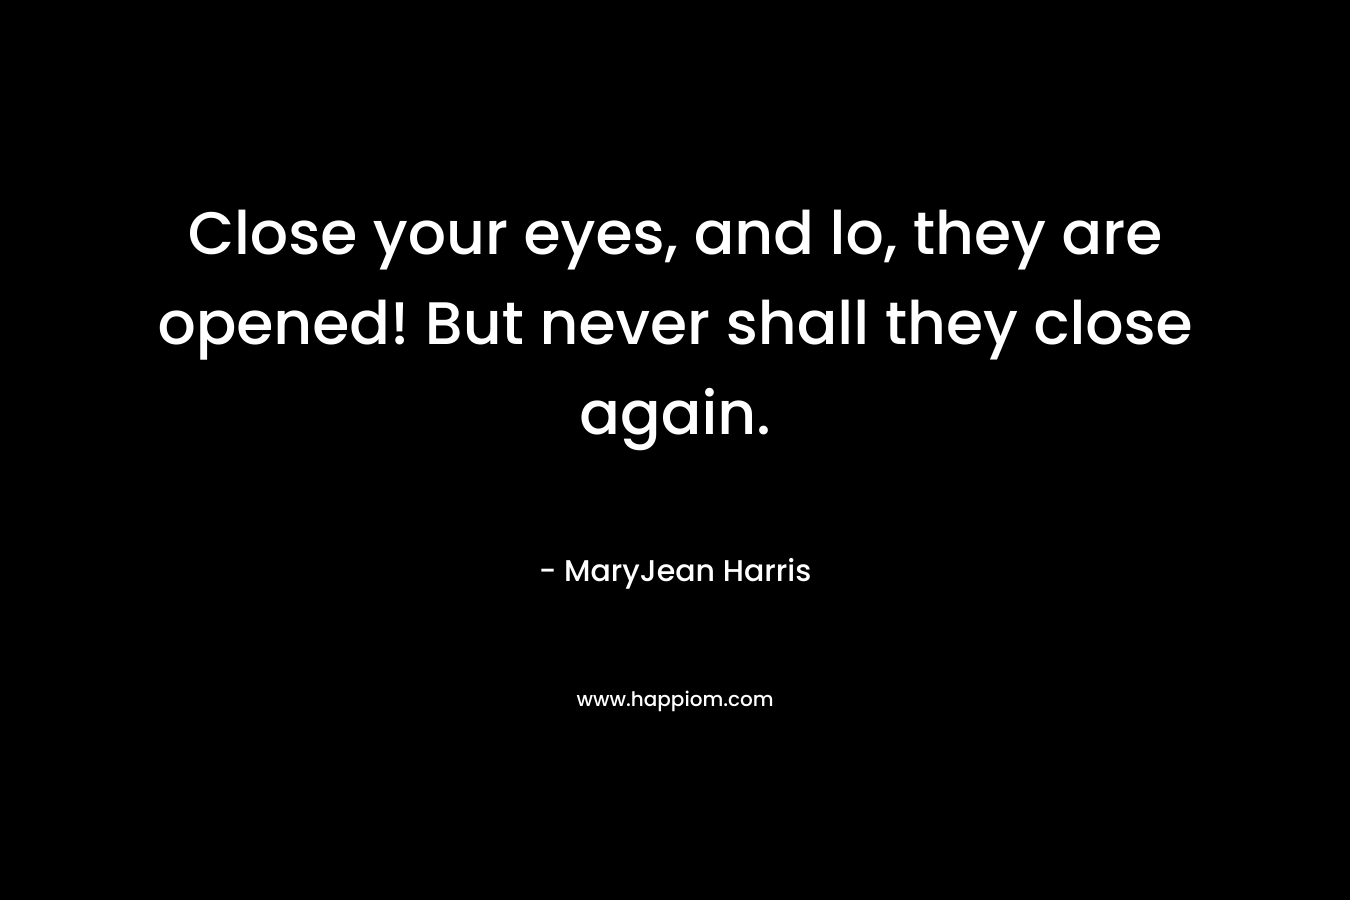 Close your eyes, and lo, they are opened! But never shall they close again.